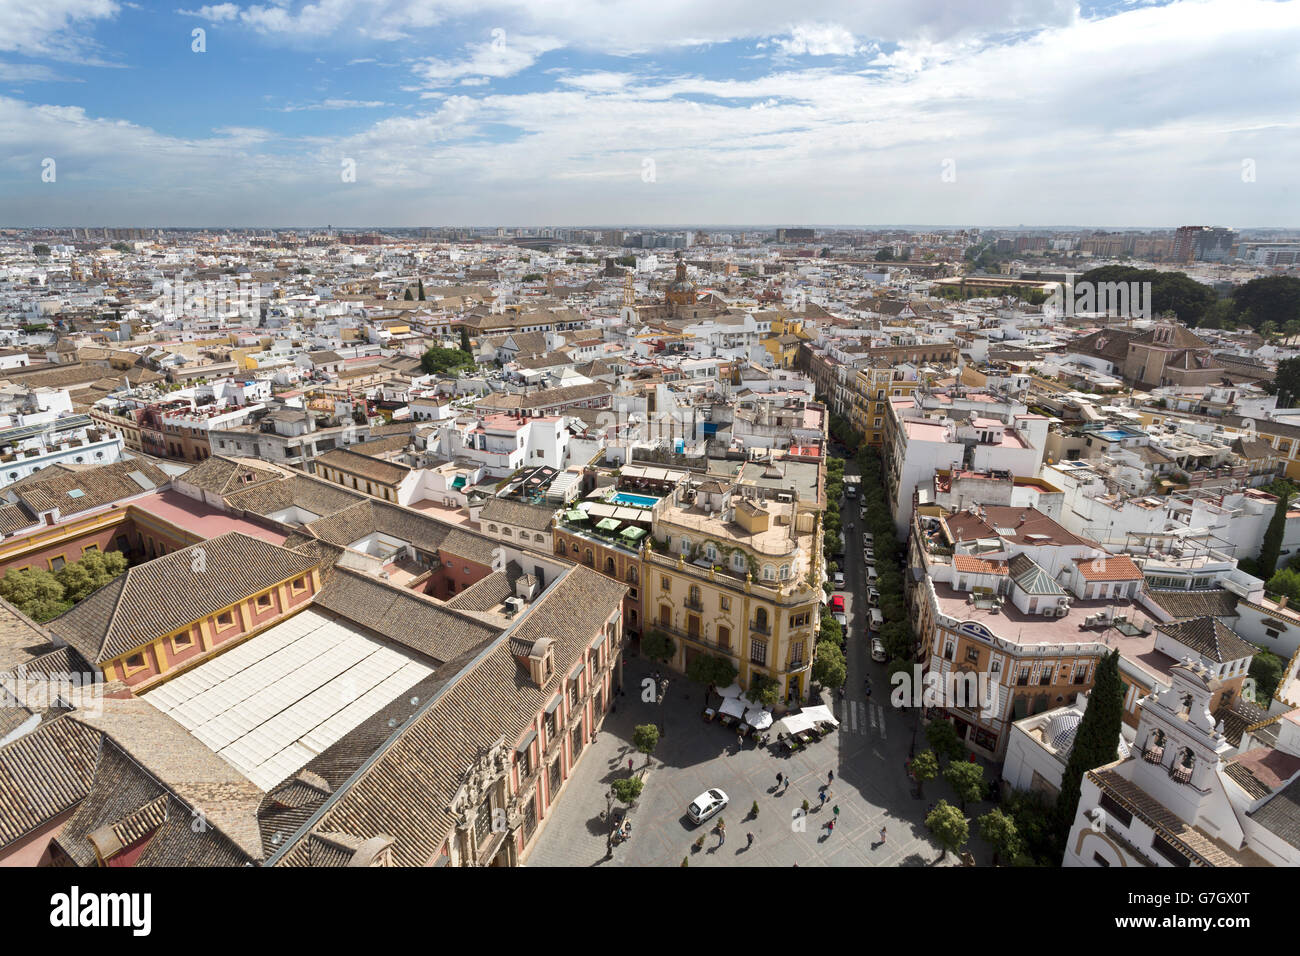 View of Seville, the capital and largest city of the autonomous community of Andalusia, Spain Stock Photo